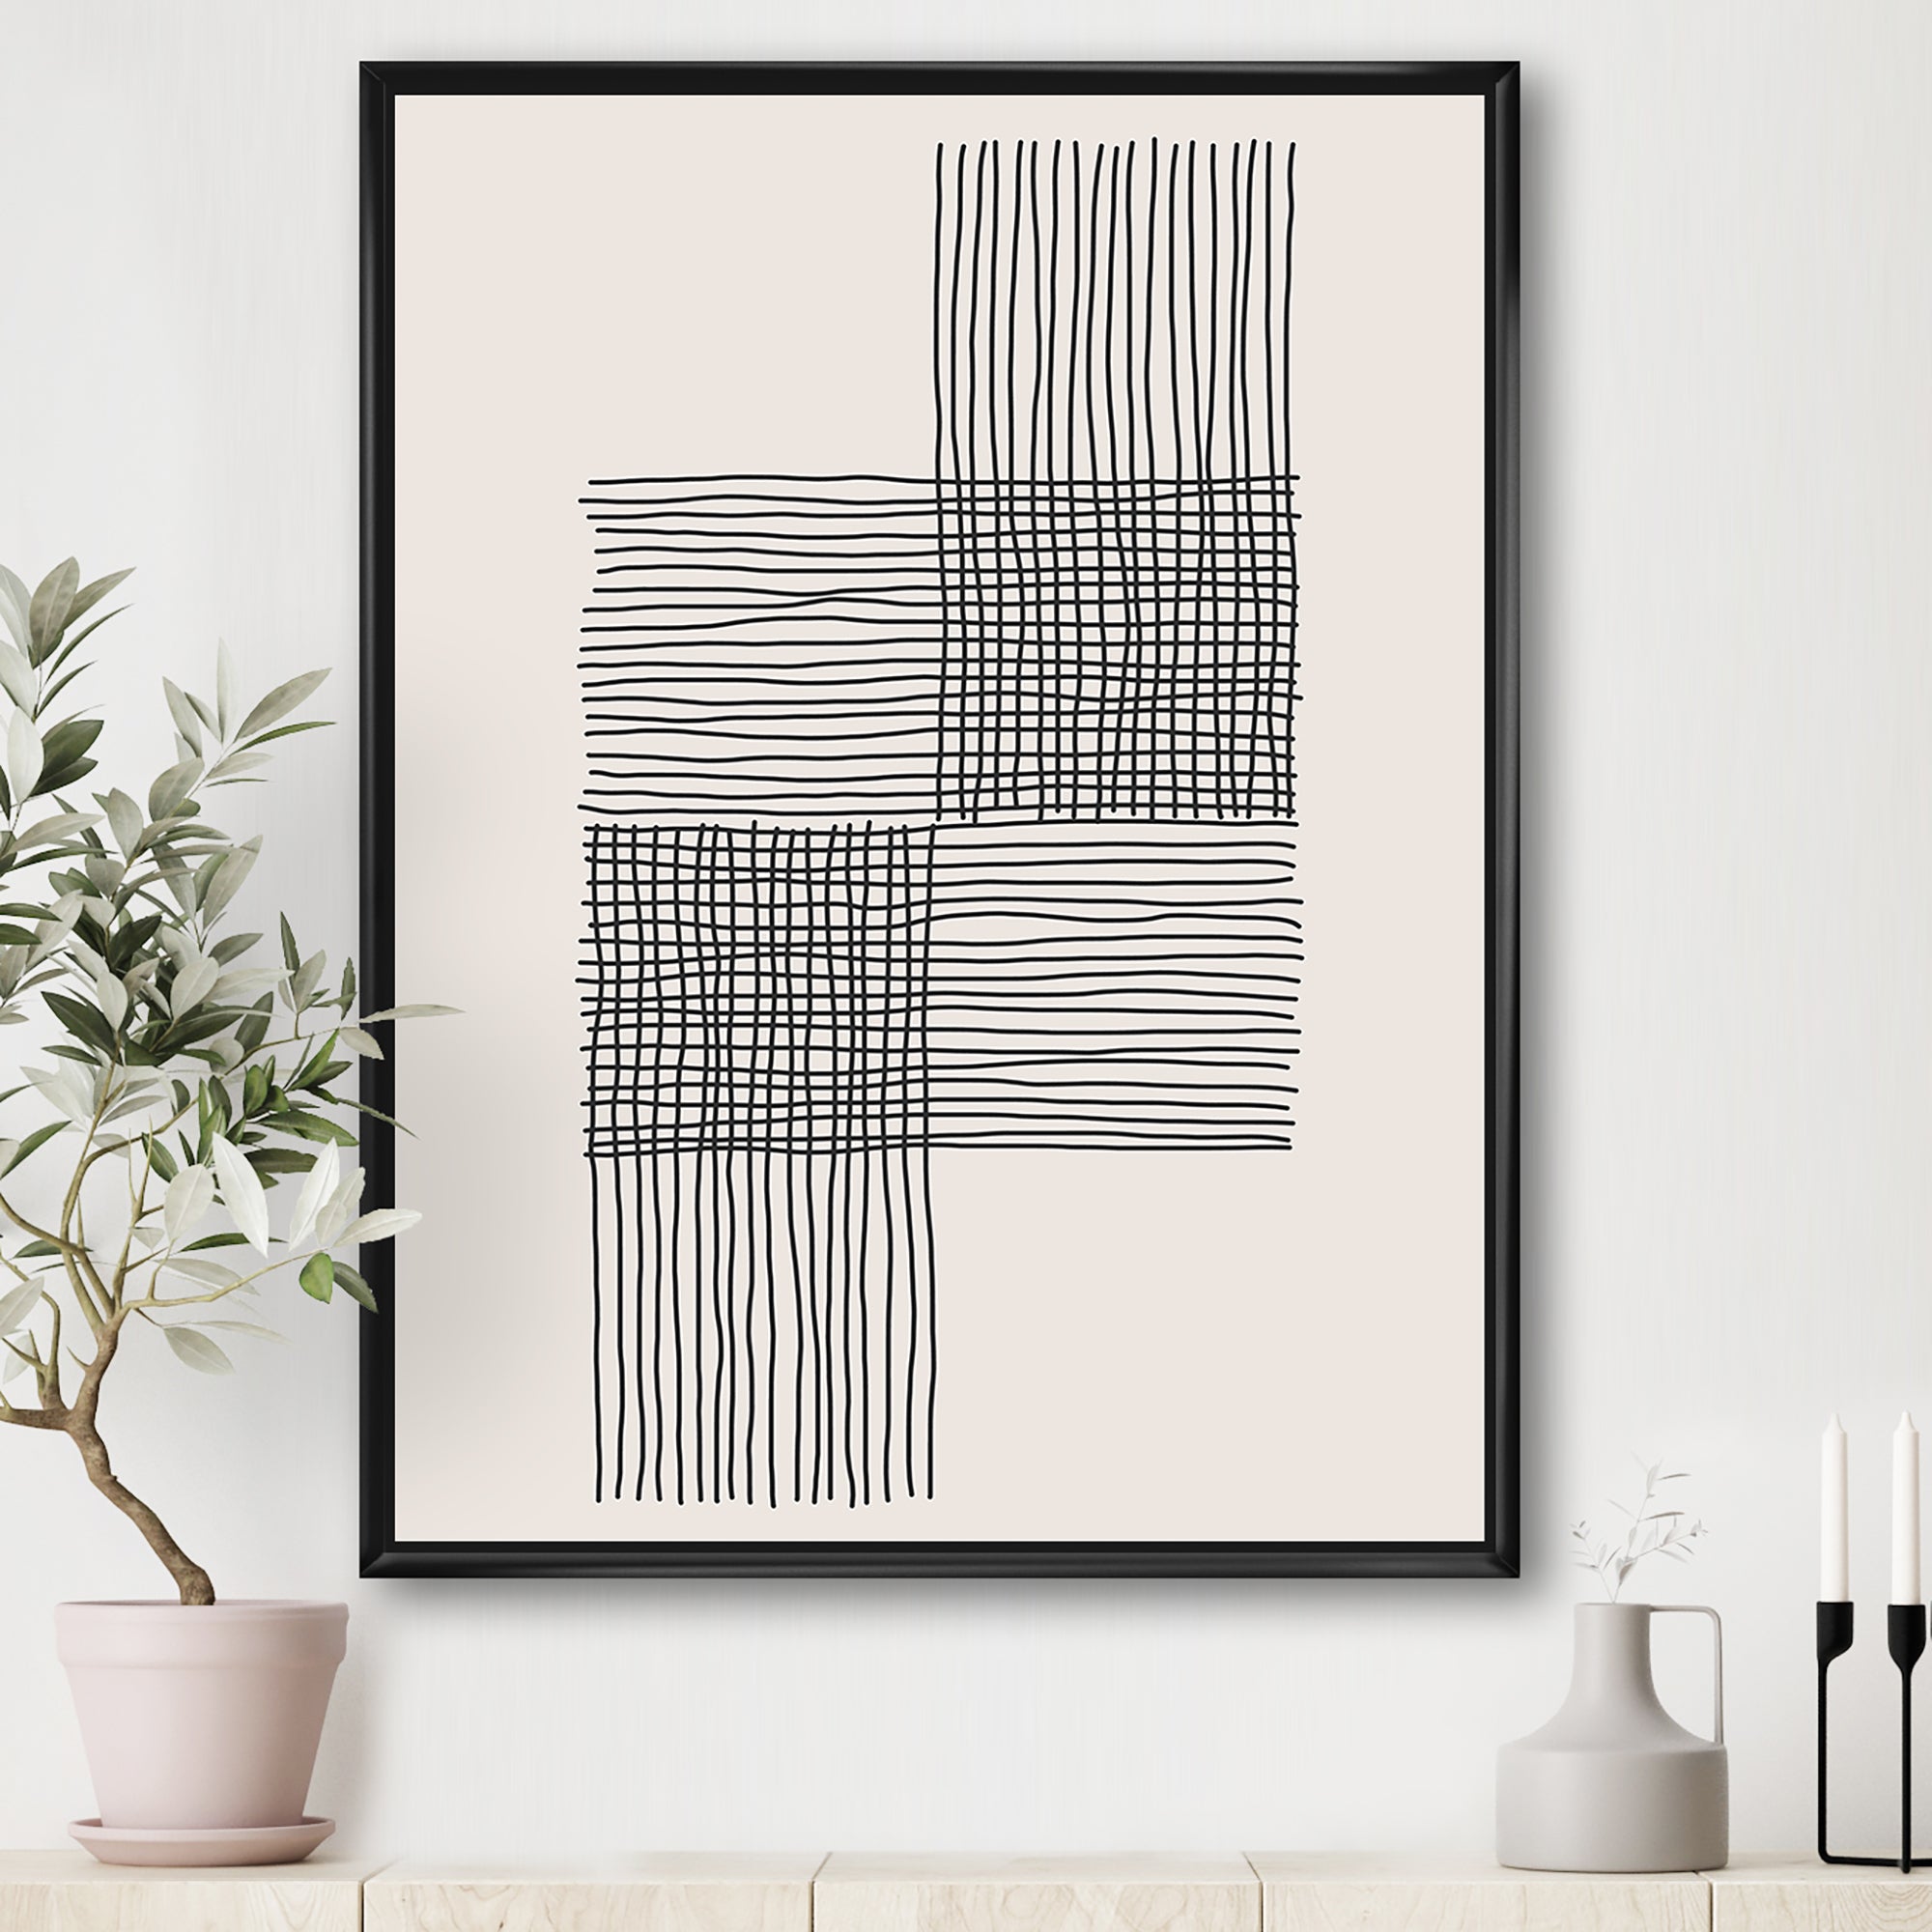 Minimal Geometric Compostions Of Elementary Forms XIX Wall Art